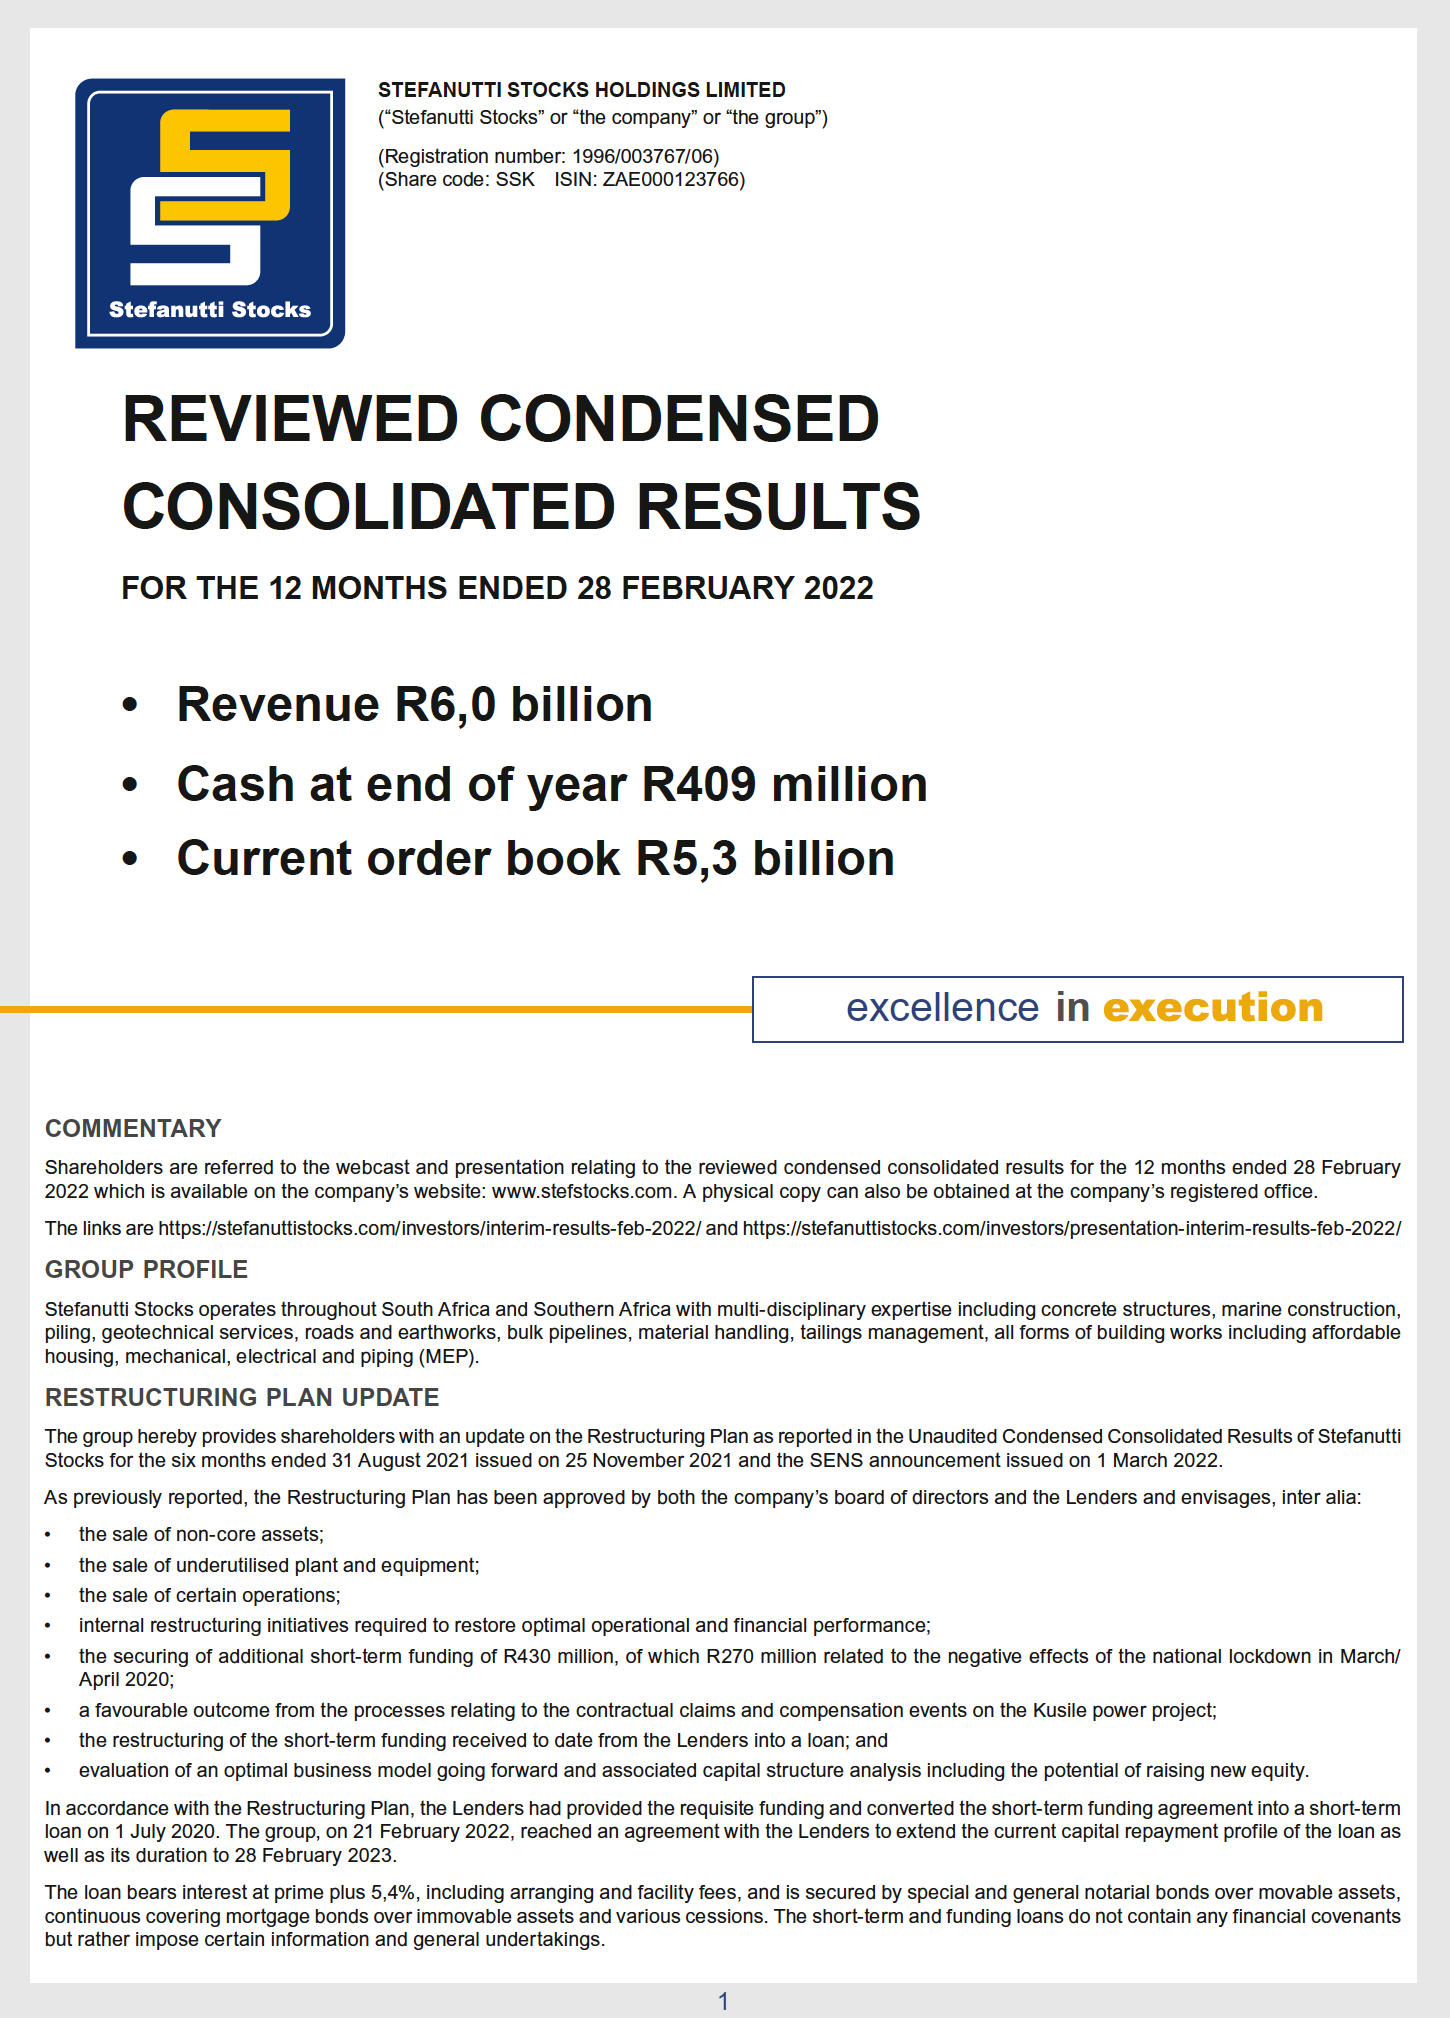 Reviewed Condensed Consolidated Results Feb 2022